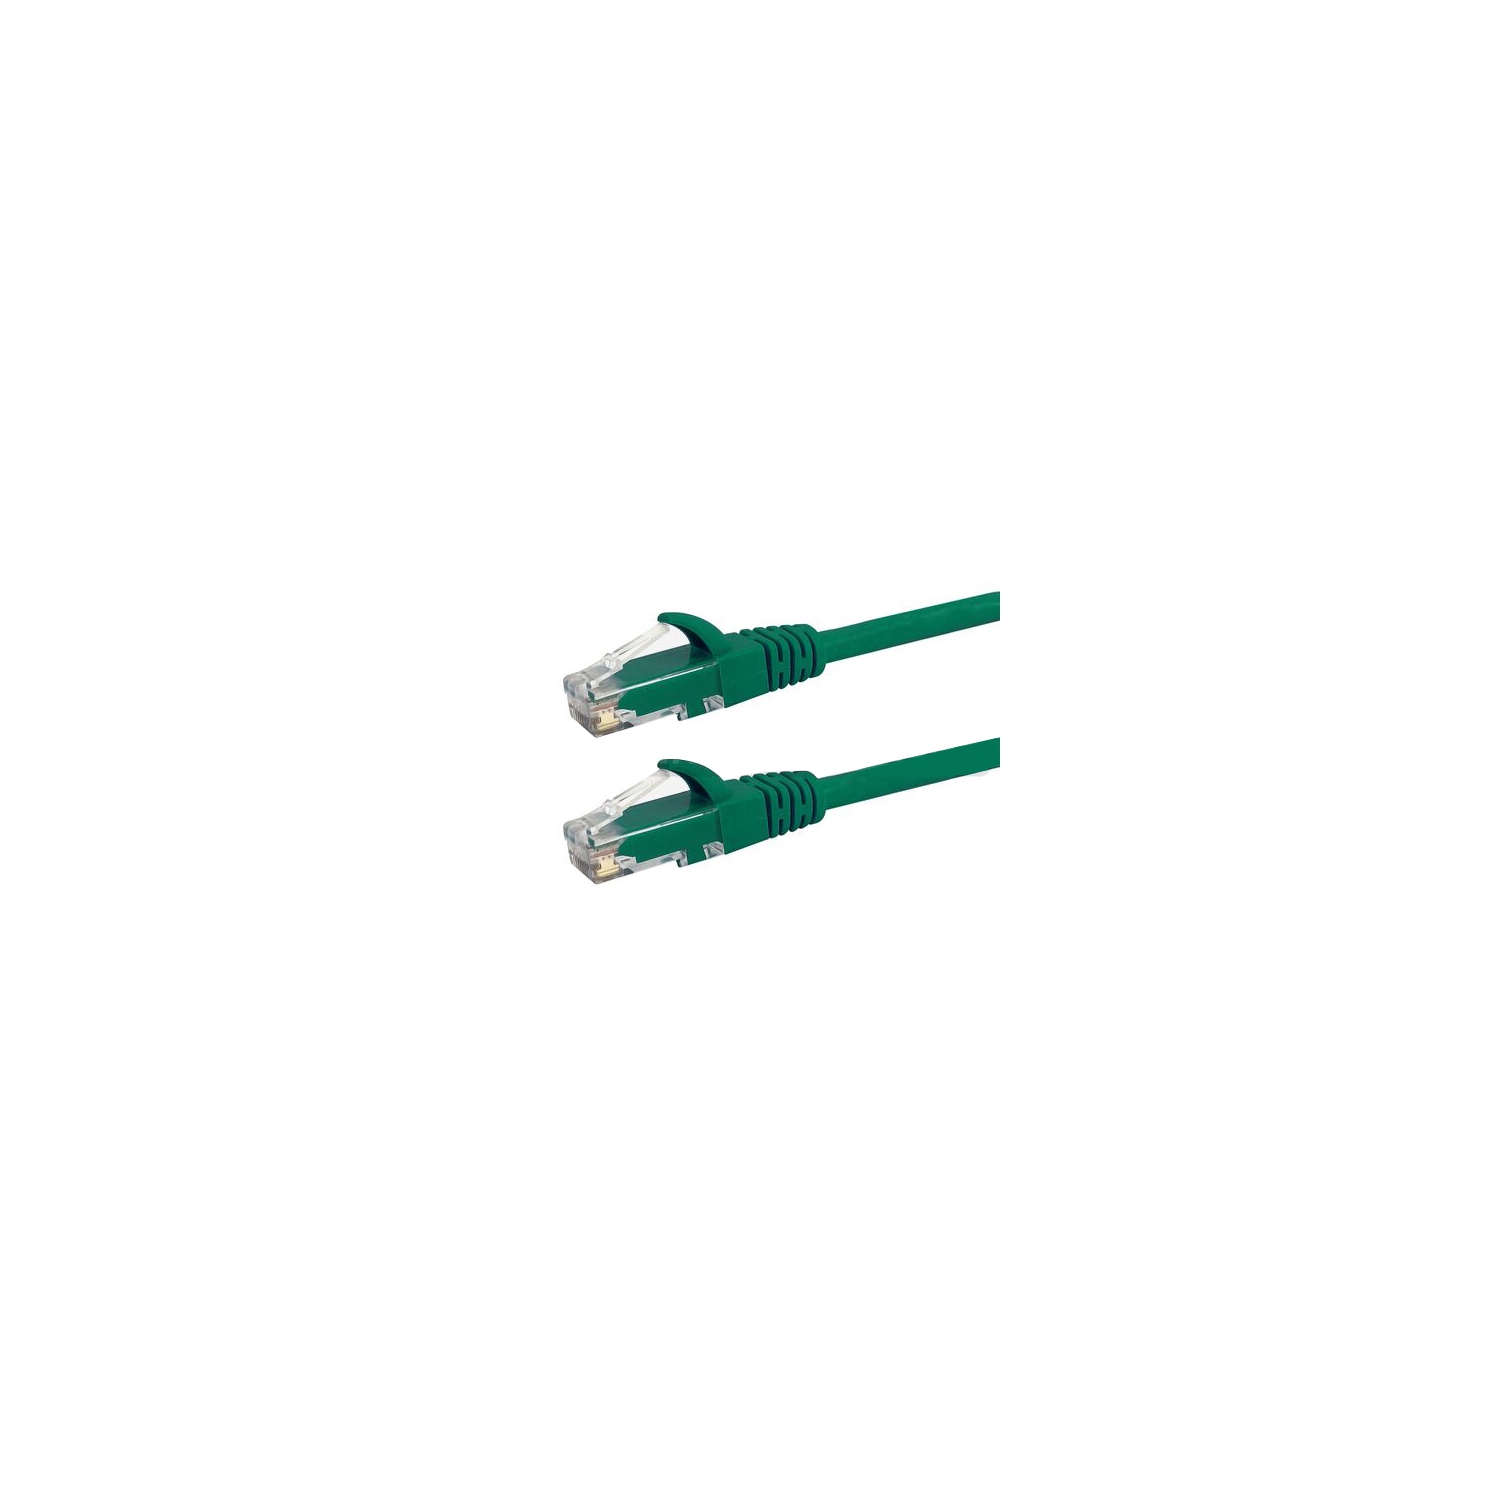 Cat6 550MHz Molded Patch Cable - Premium Fluke® Certified 10G Network/Internet Cable- CMR Riser Rated, 2 ft Green